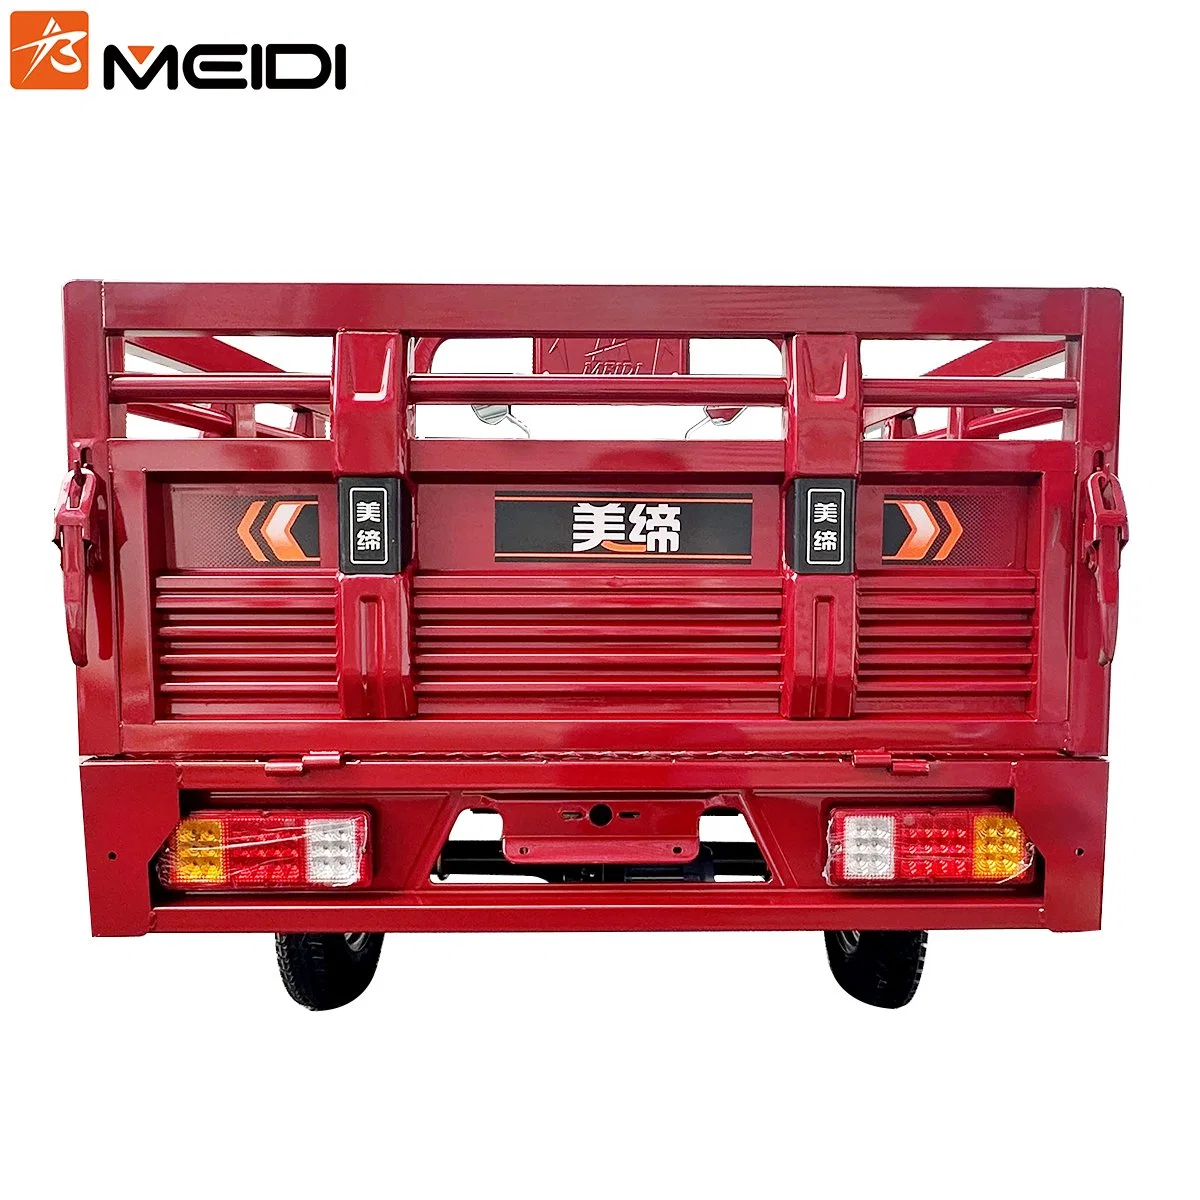 Meidi Powerful Climbing Ability E-Rickshaw Loader Electric Cargo Tricycle